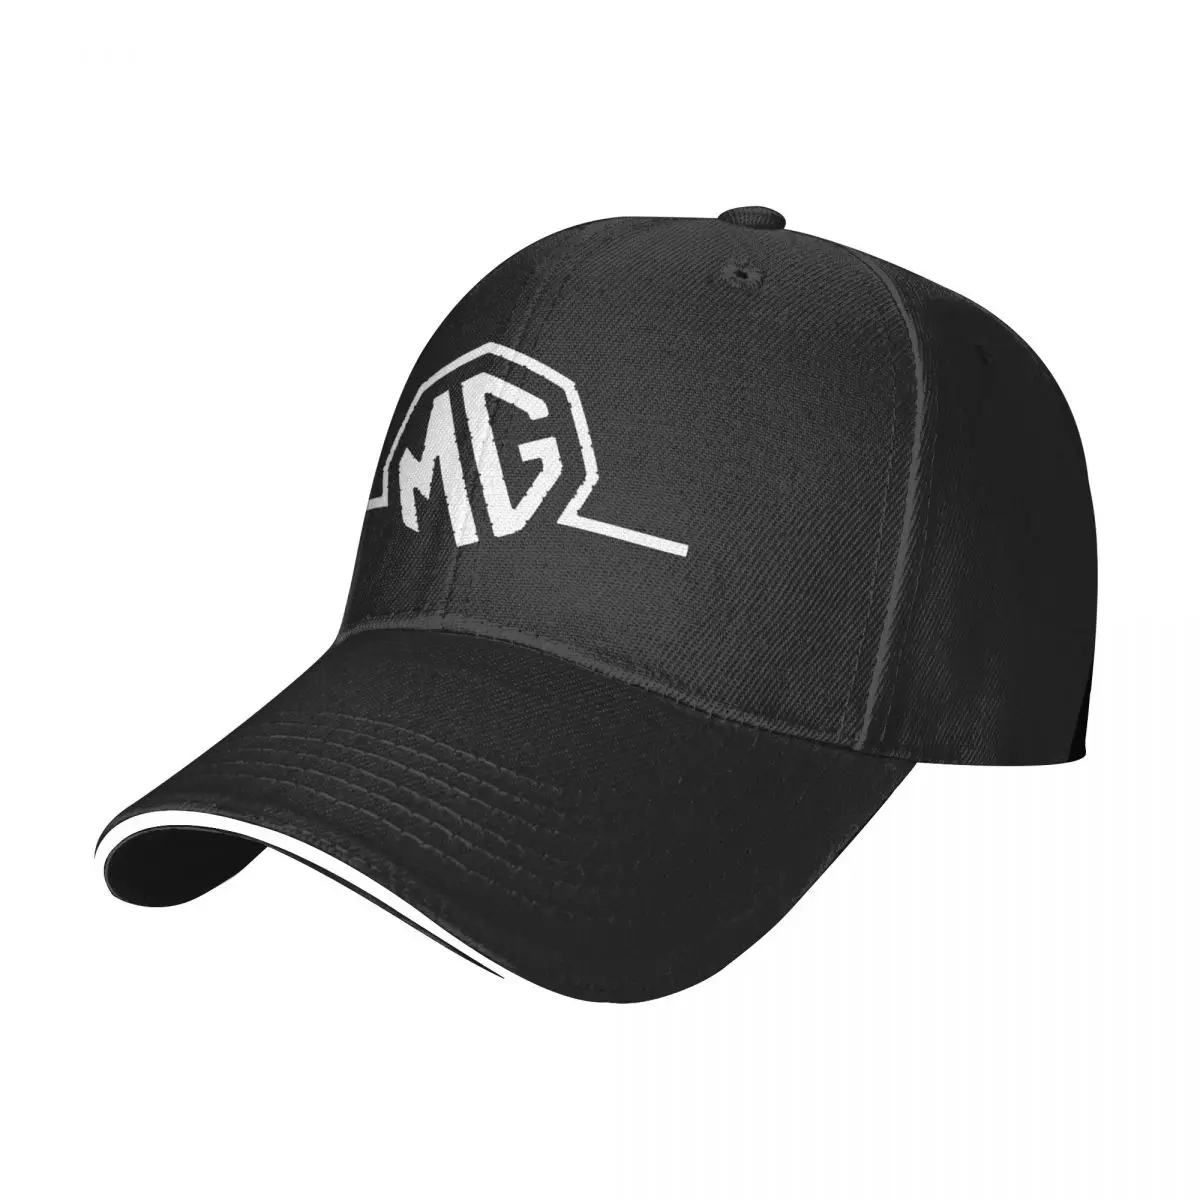 

Mg 8 Hat Men'S And Women'S Fashion Trends Four Seasons Hats Sunshade Sunscreen Baseball Caps Sports And Leisure Peaked